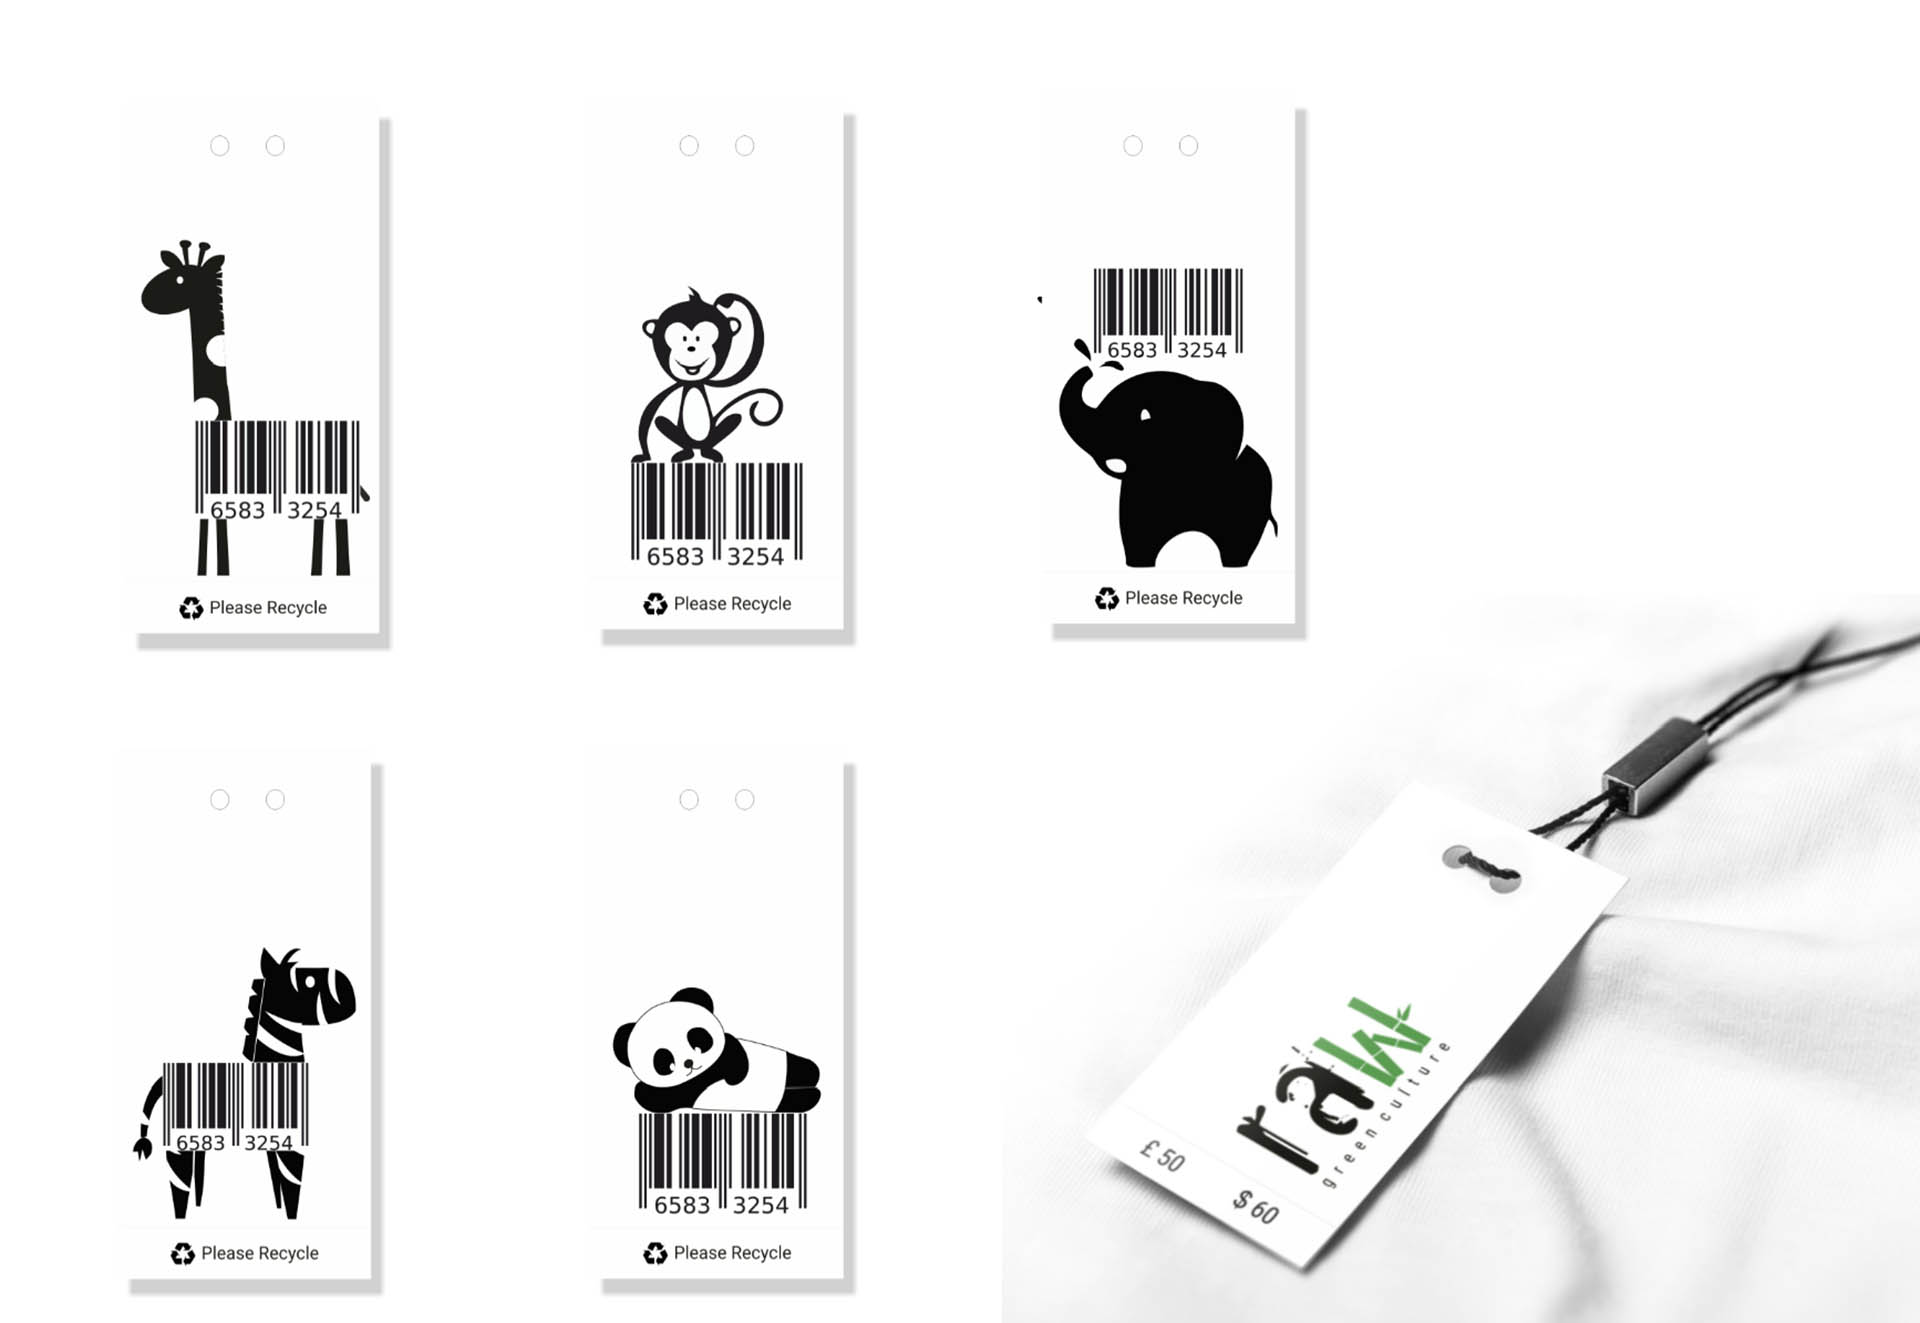 Price tag designs for the brand Raw clothing